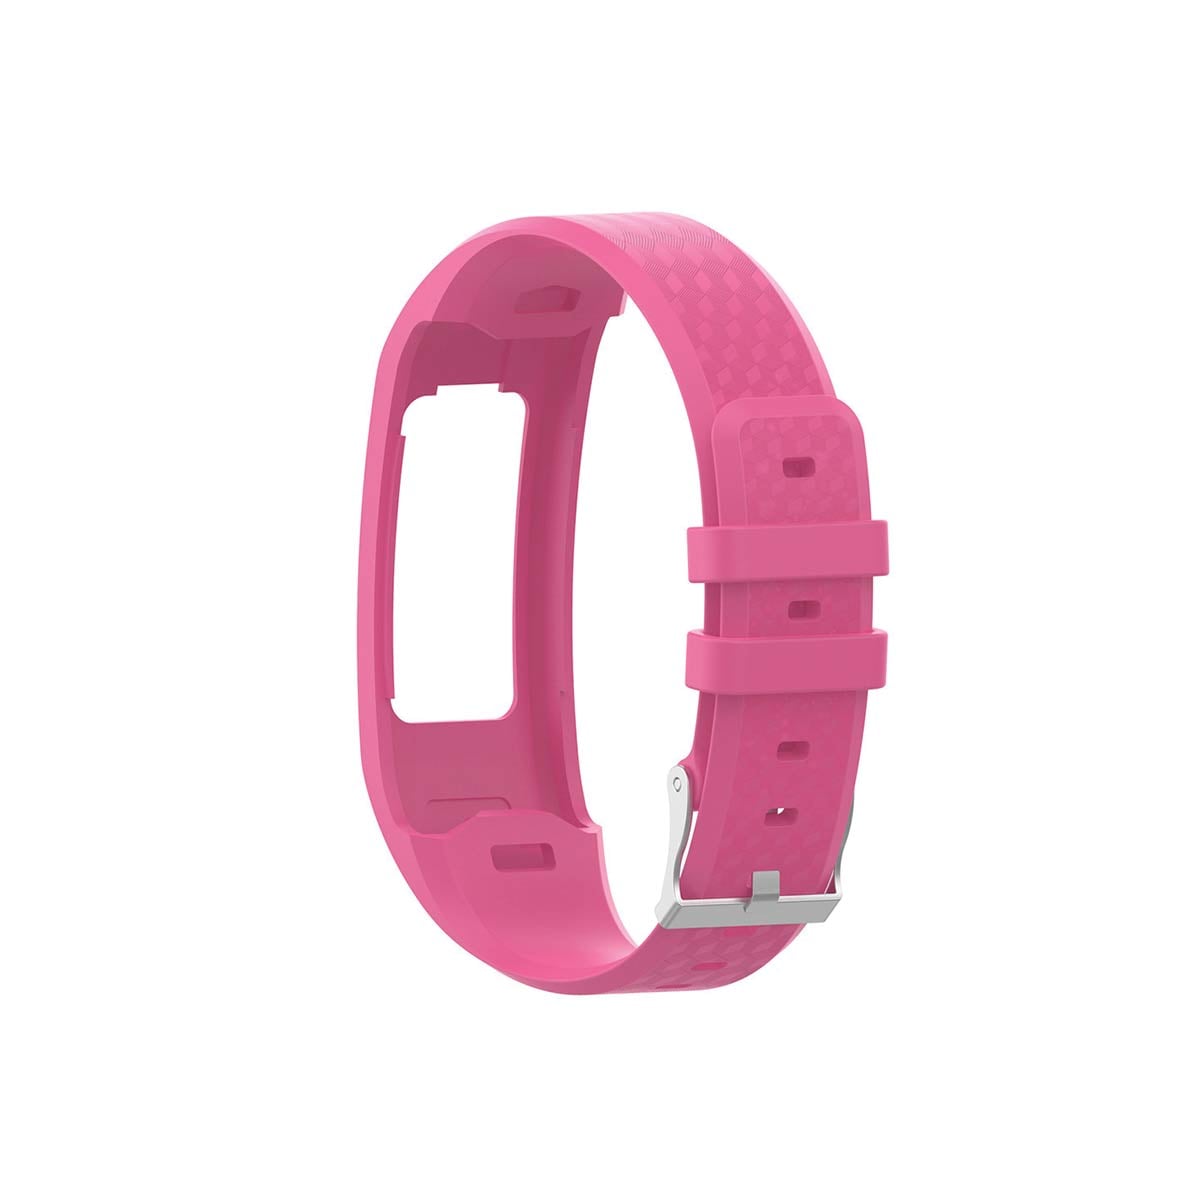 Secure Garmin Vivofit 1 & 2 Band Replacement Strap with Buckle Small Pink 